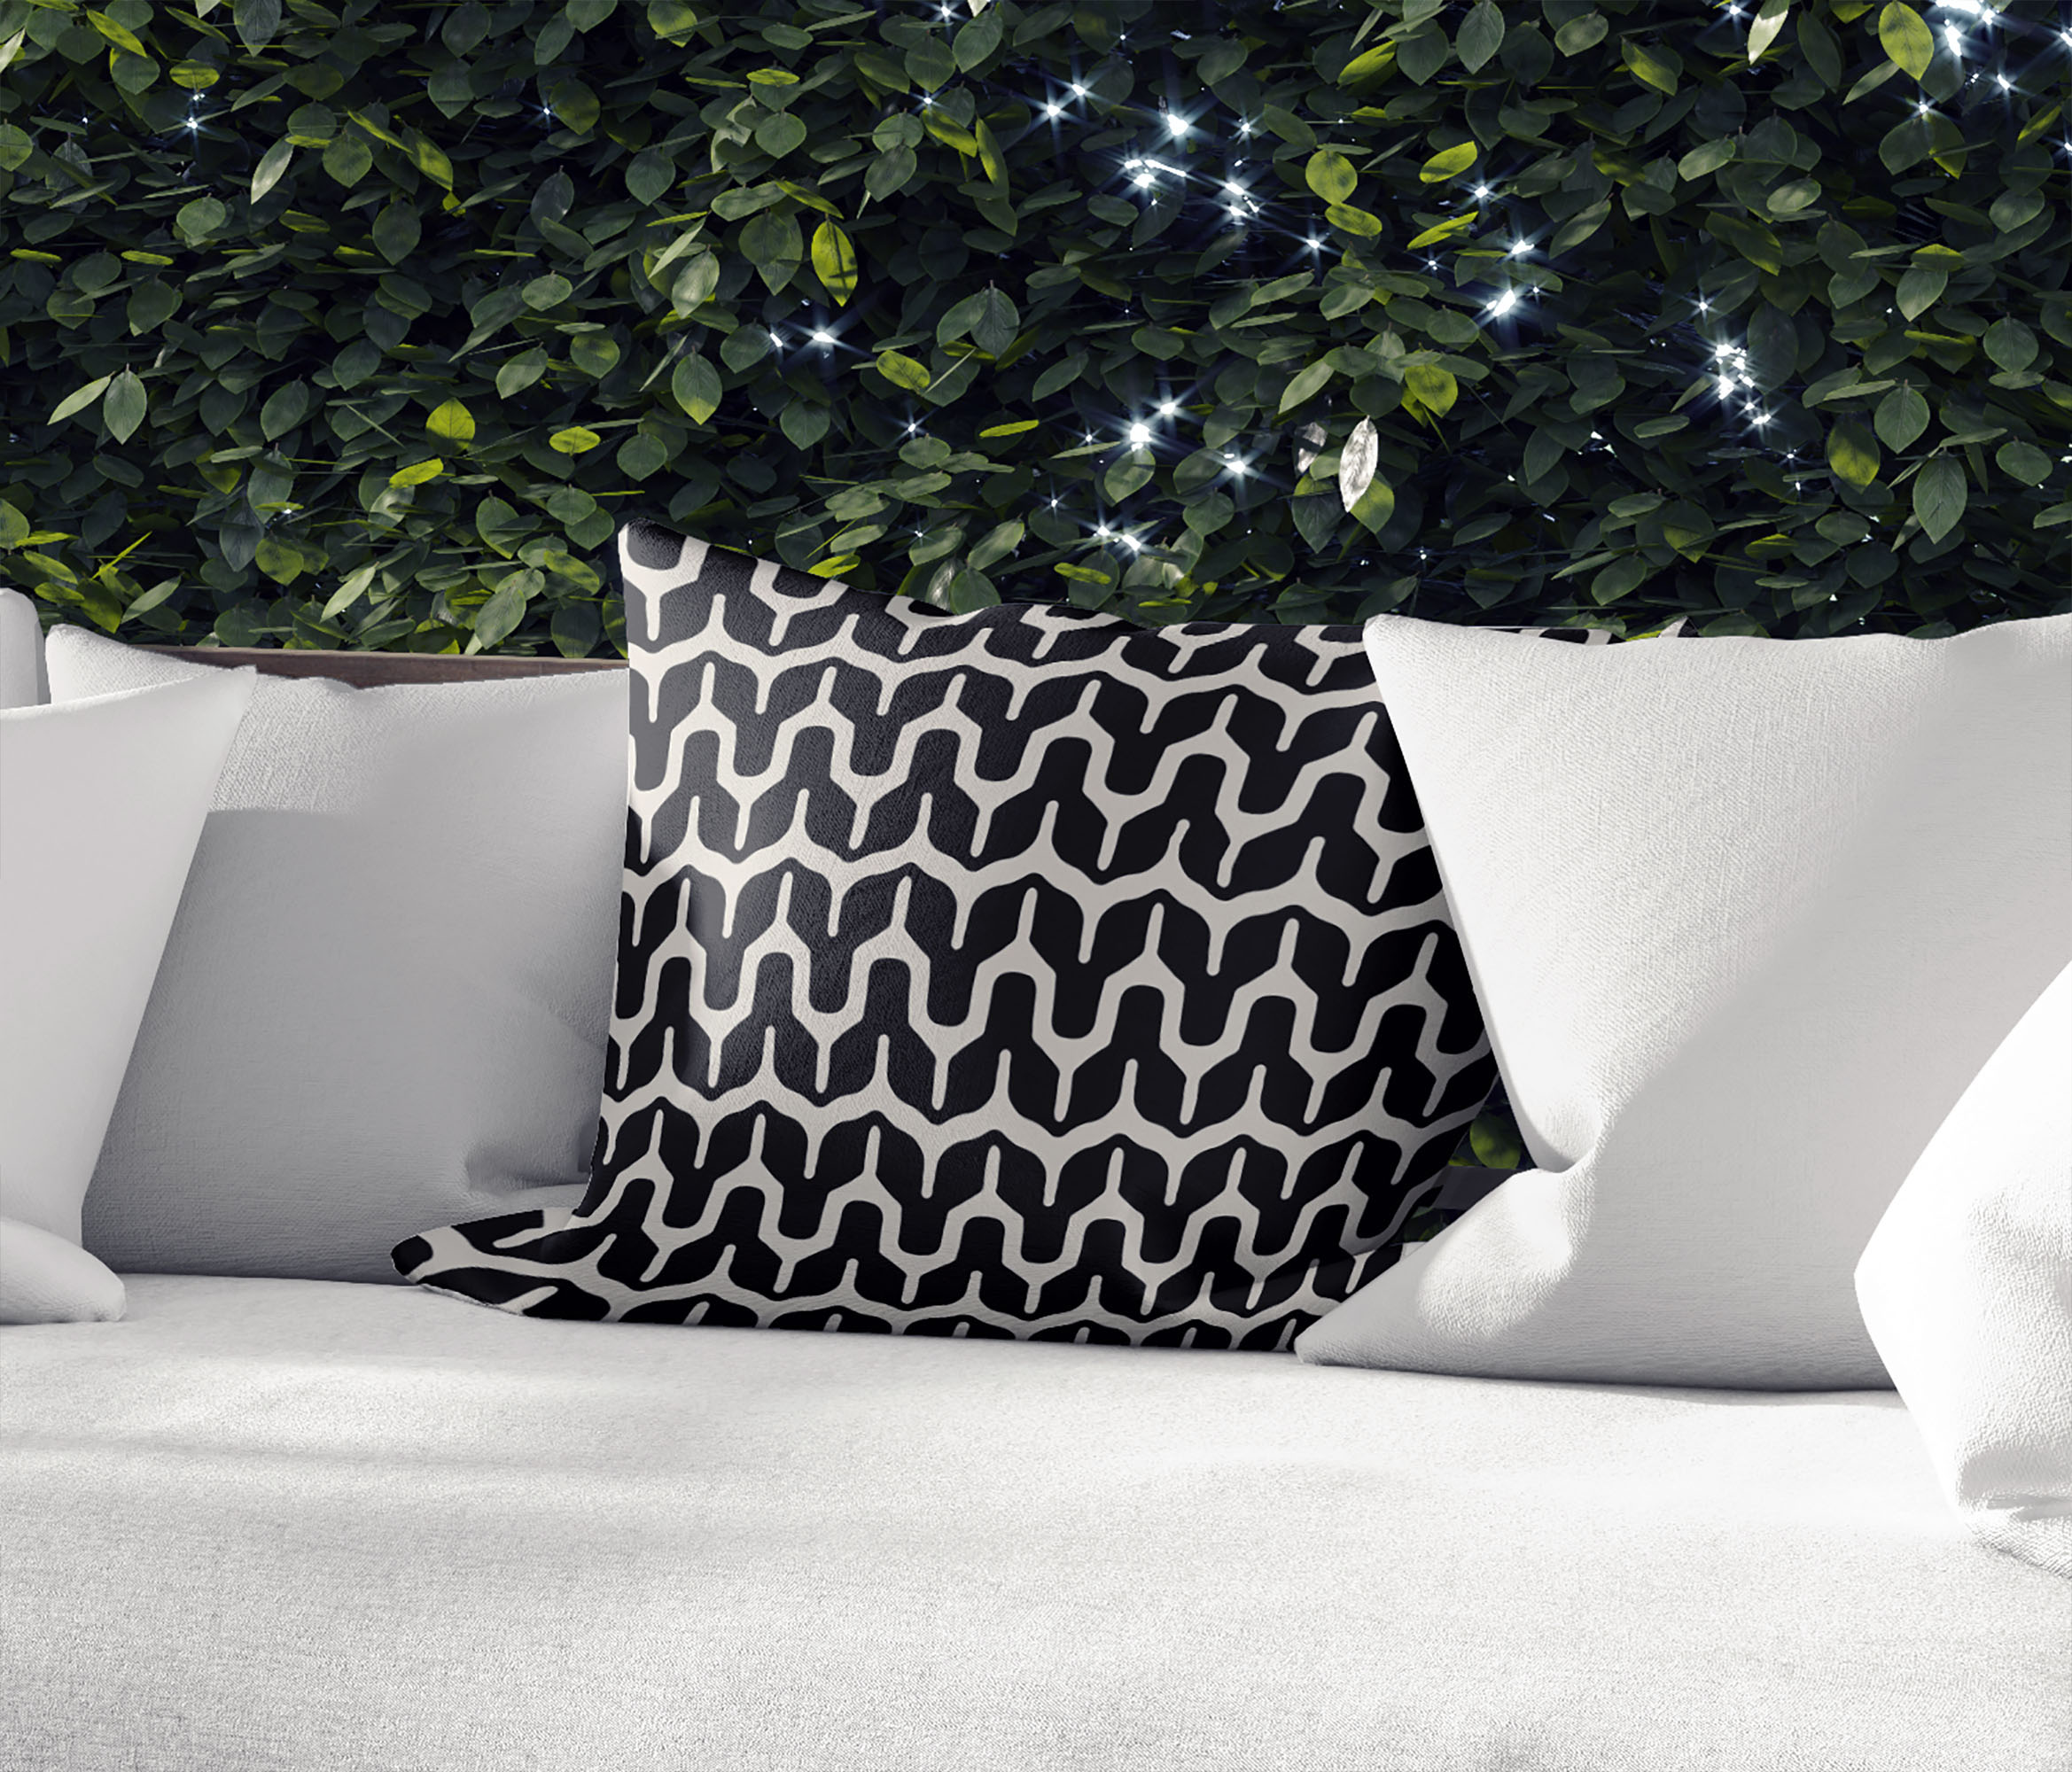 Maria Black and Beige Outdoor Pillow by Kavka Designs - image 5 of 5